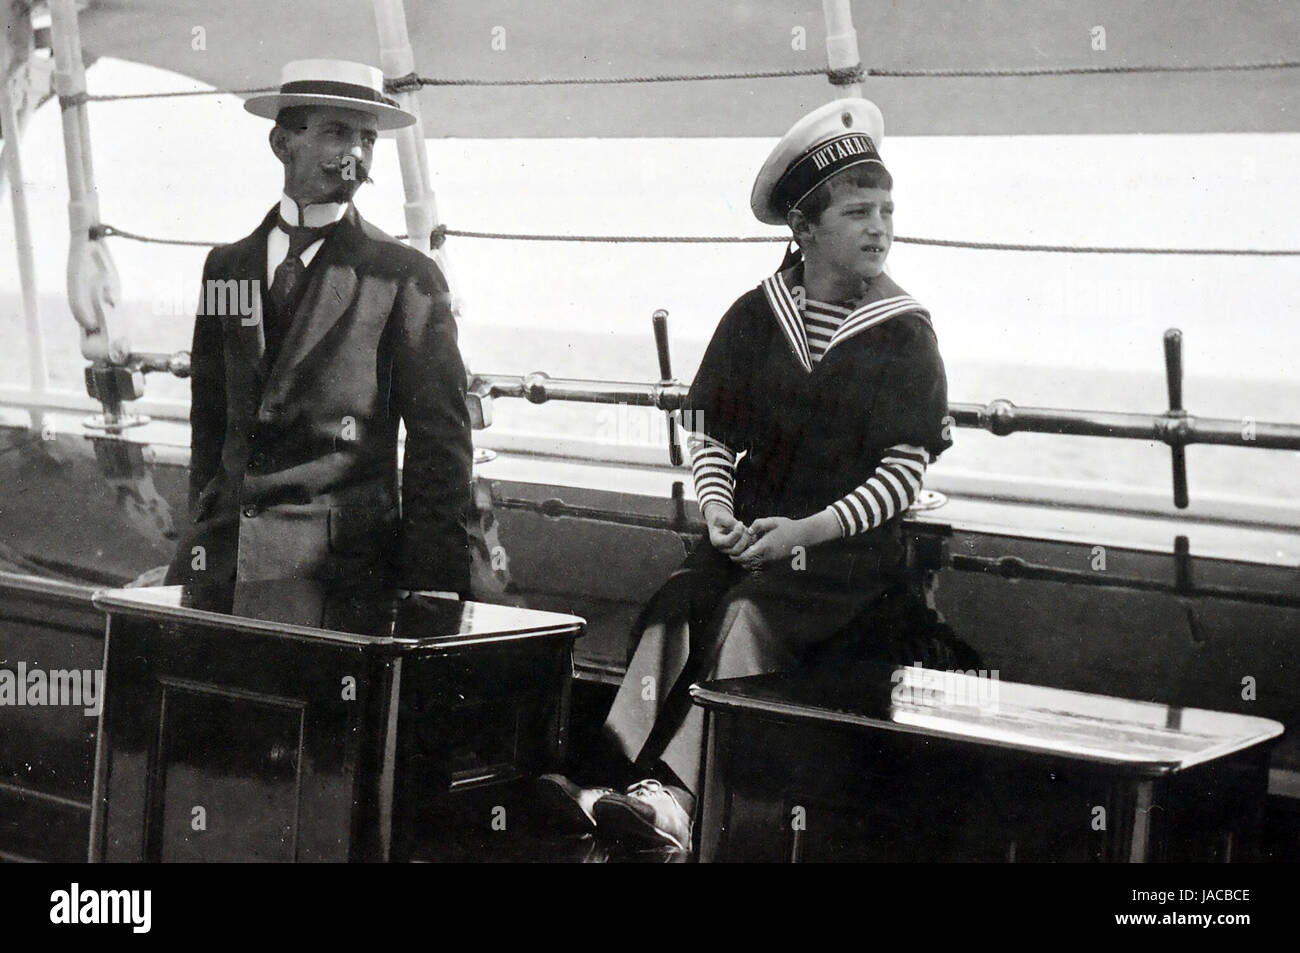 PIERRE GILLARD (1879-1962) Swiss language tutor to the children of Nicholas II with Tsarevich Alexei in 1914 aboard the Imperial yacht Standart while the family was on holiday. Stock Photo